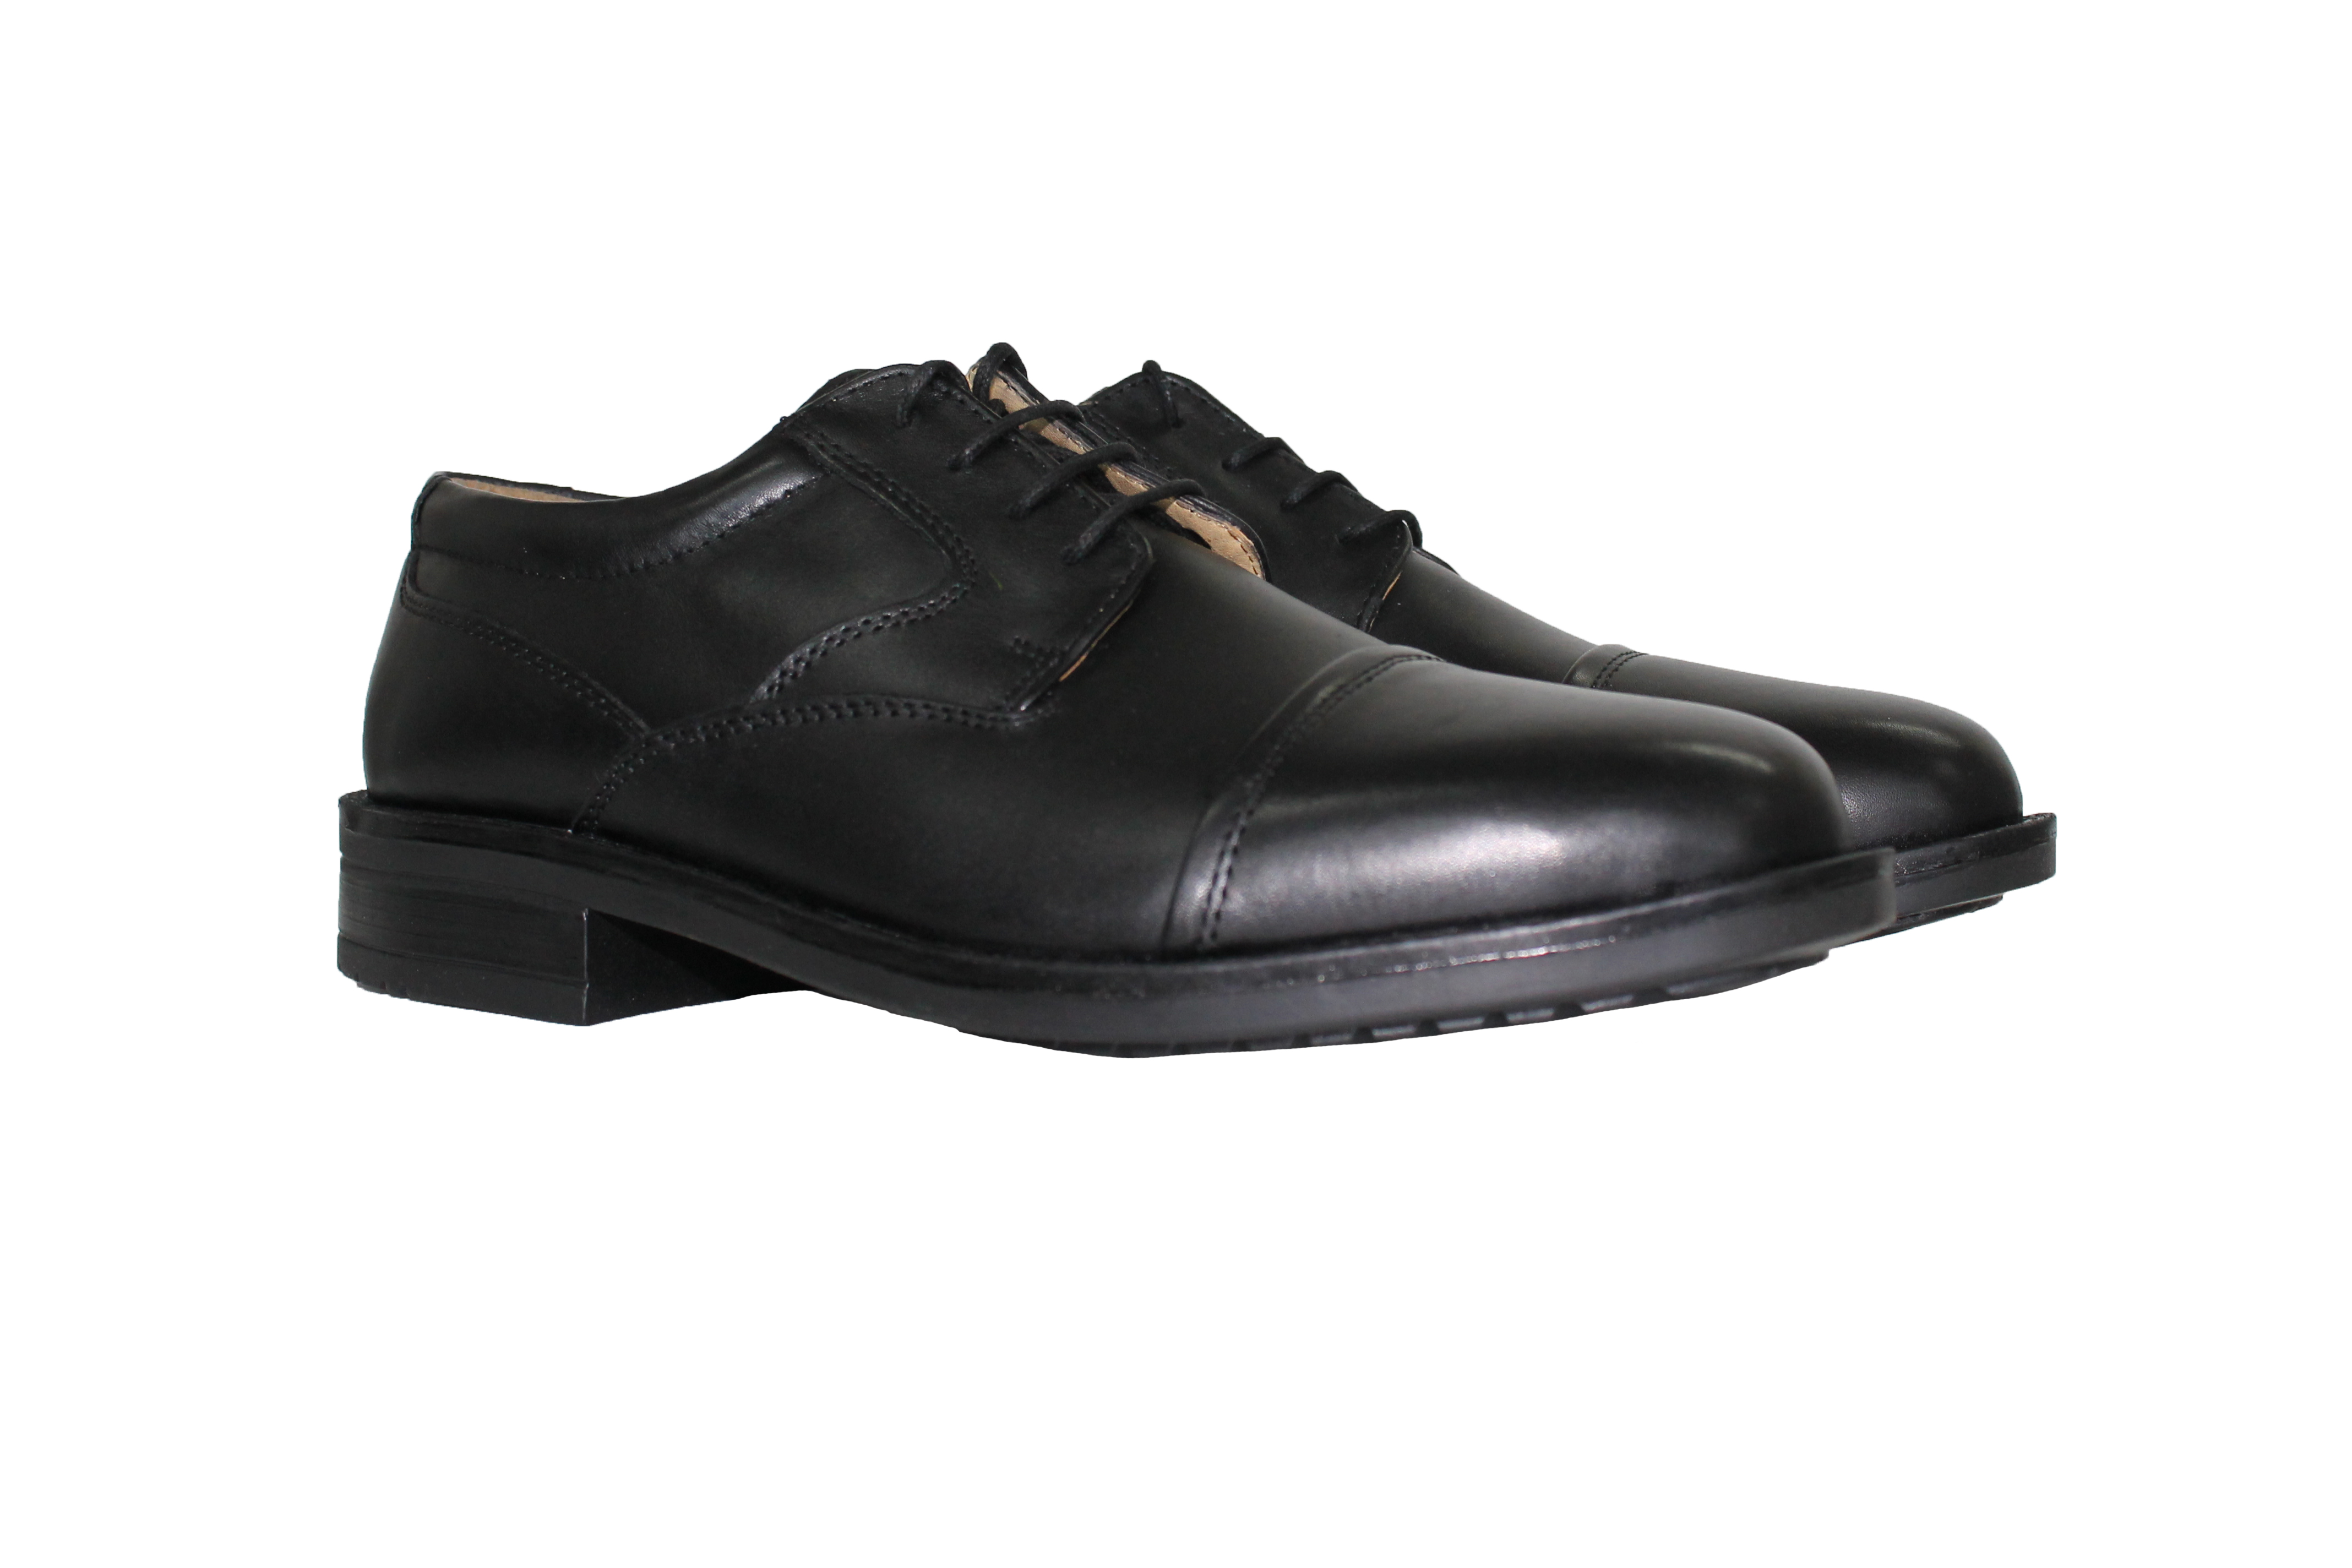 Black Leather Upper, PVC Sole, Oxford Style Lace Up – Miller Rayner